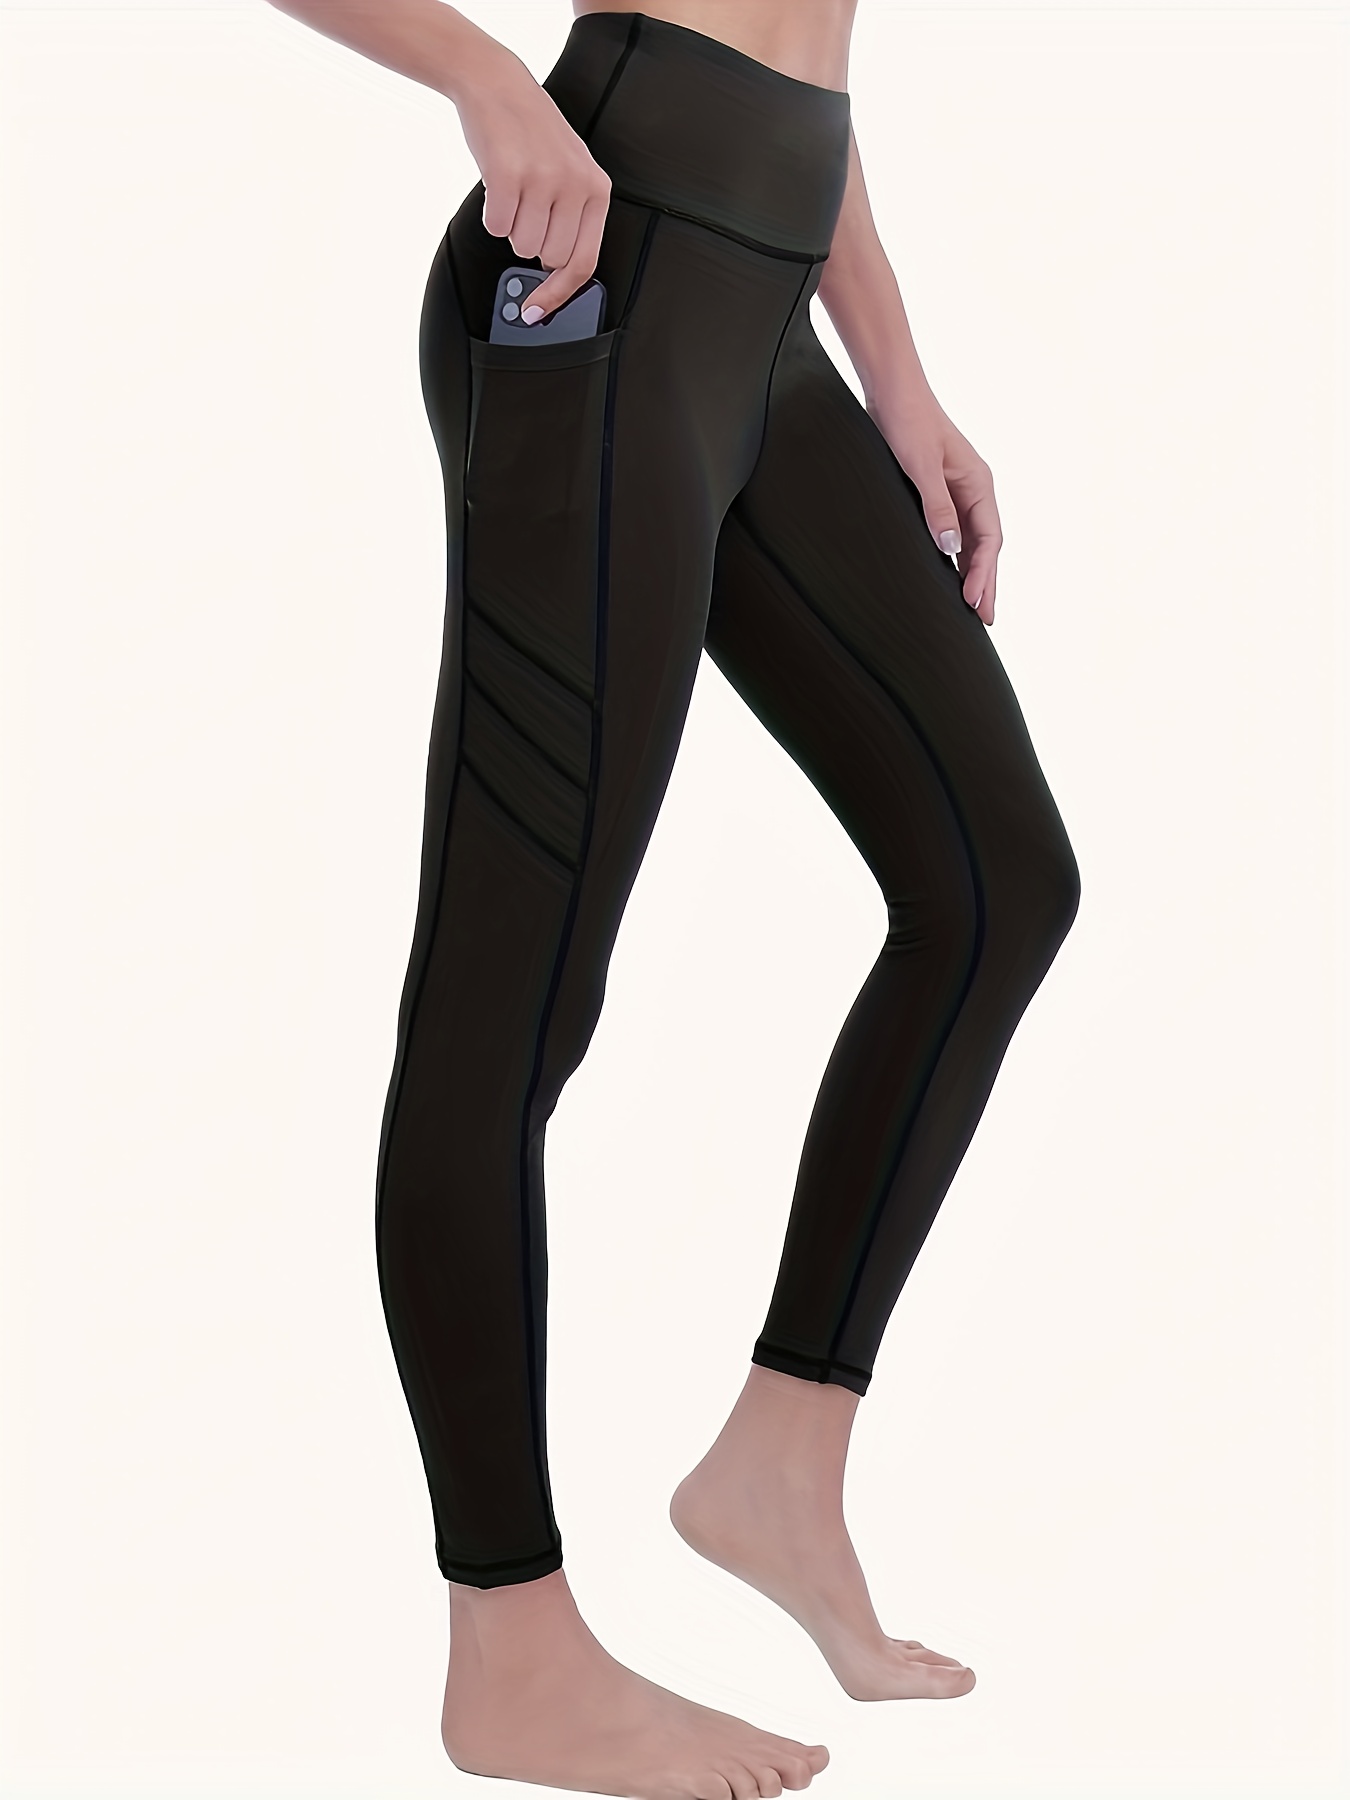 Wide Waistband Sports Leggings With Phone Pocket